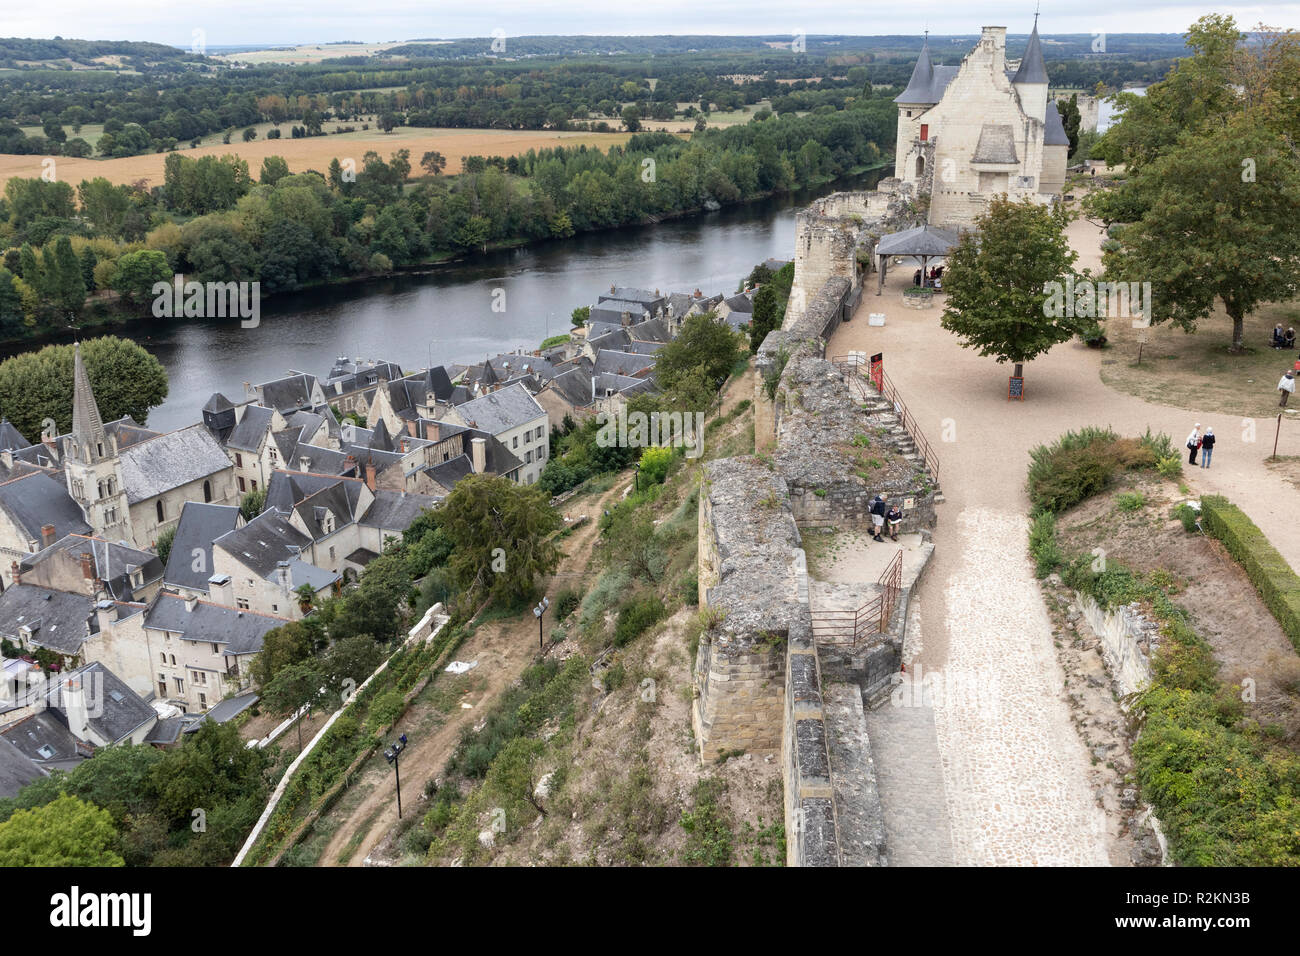 A view of Chinon in the Loire Valley, taken from the Castle forteresse royale. Stock Photo